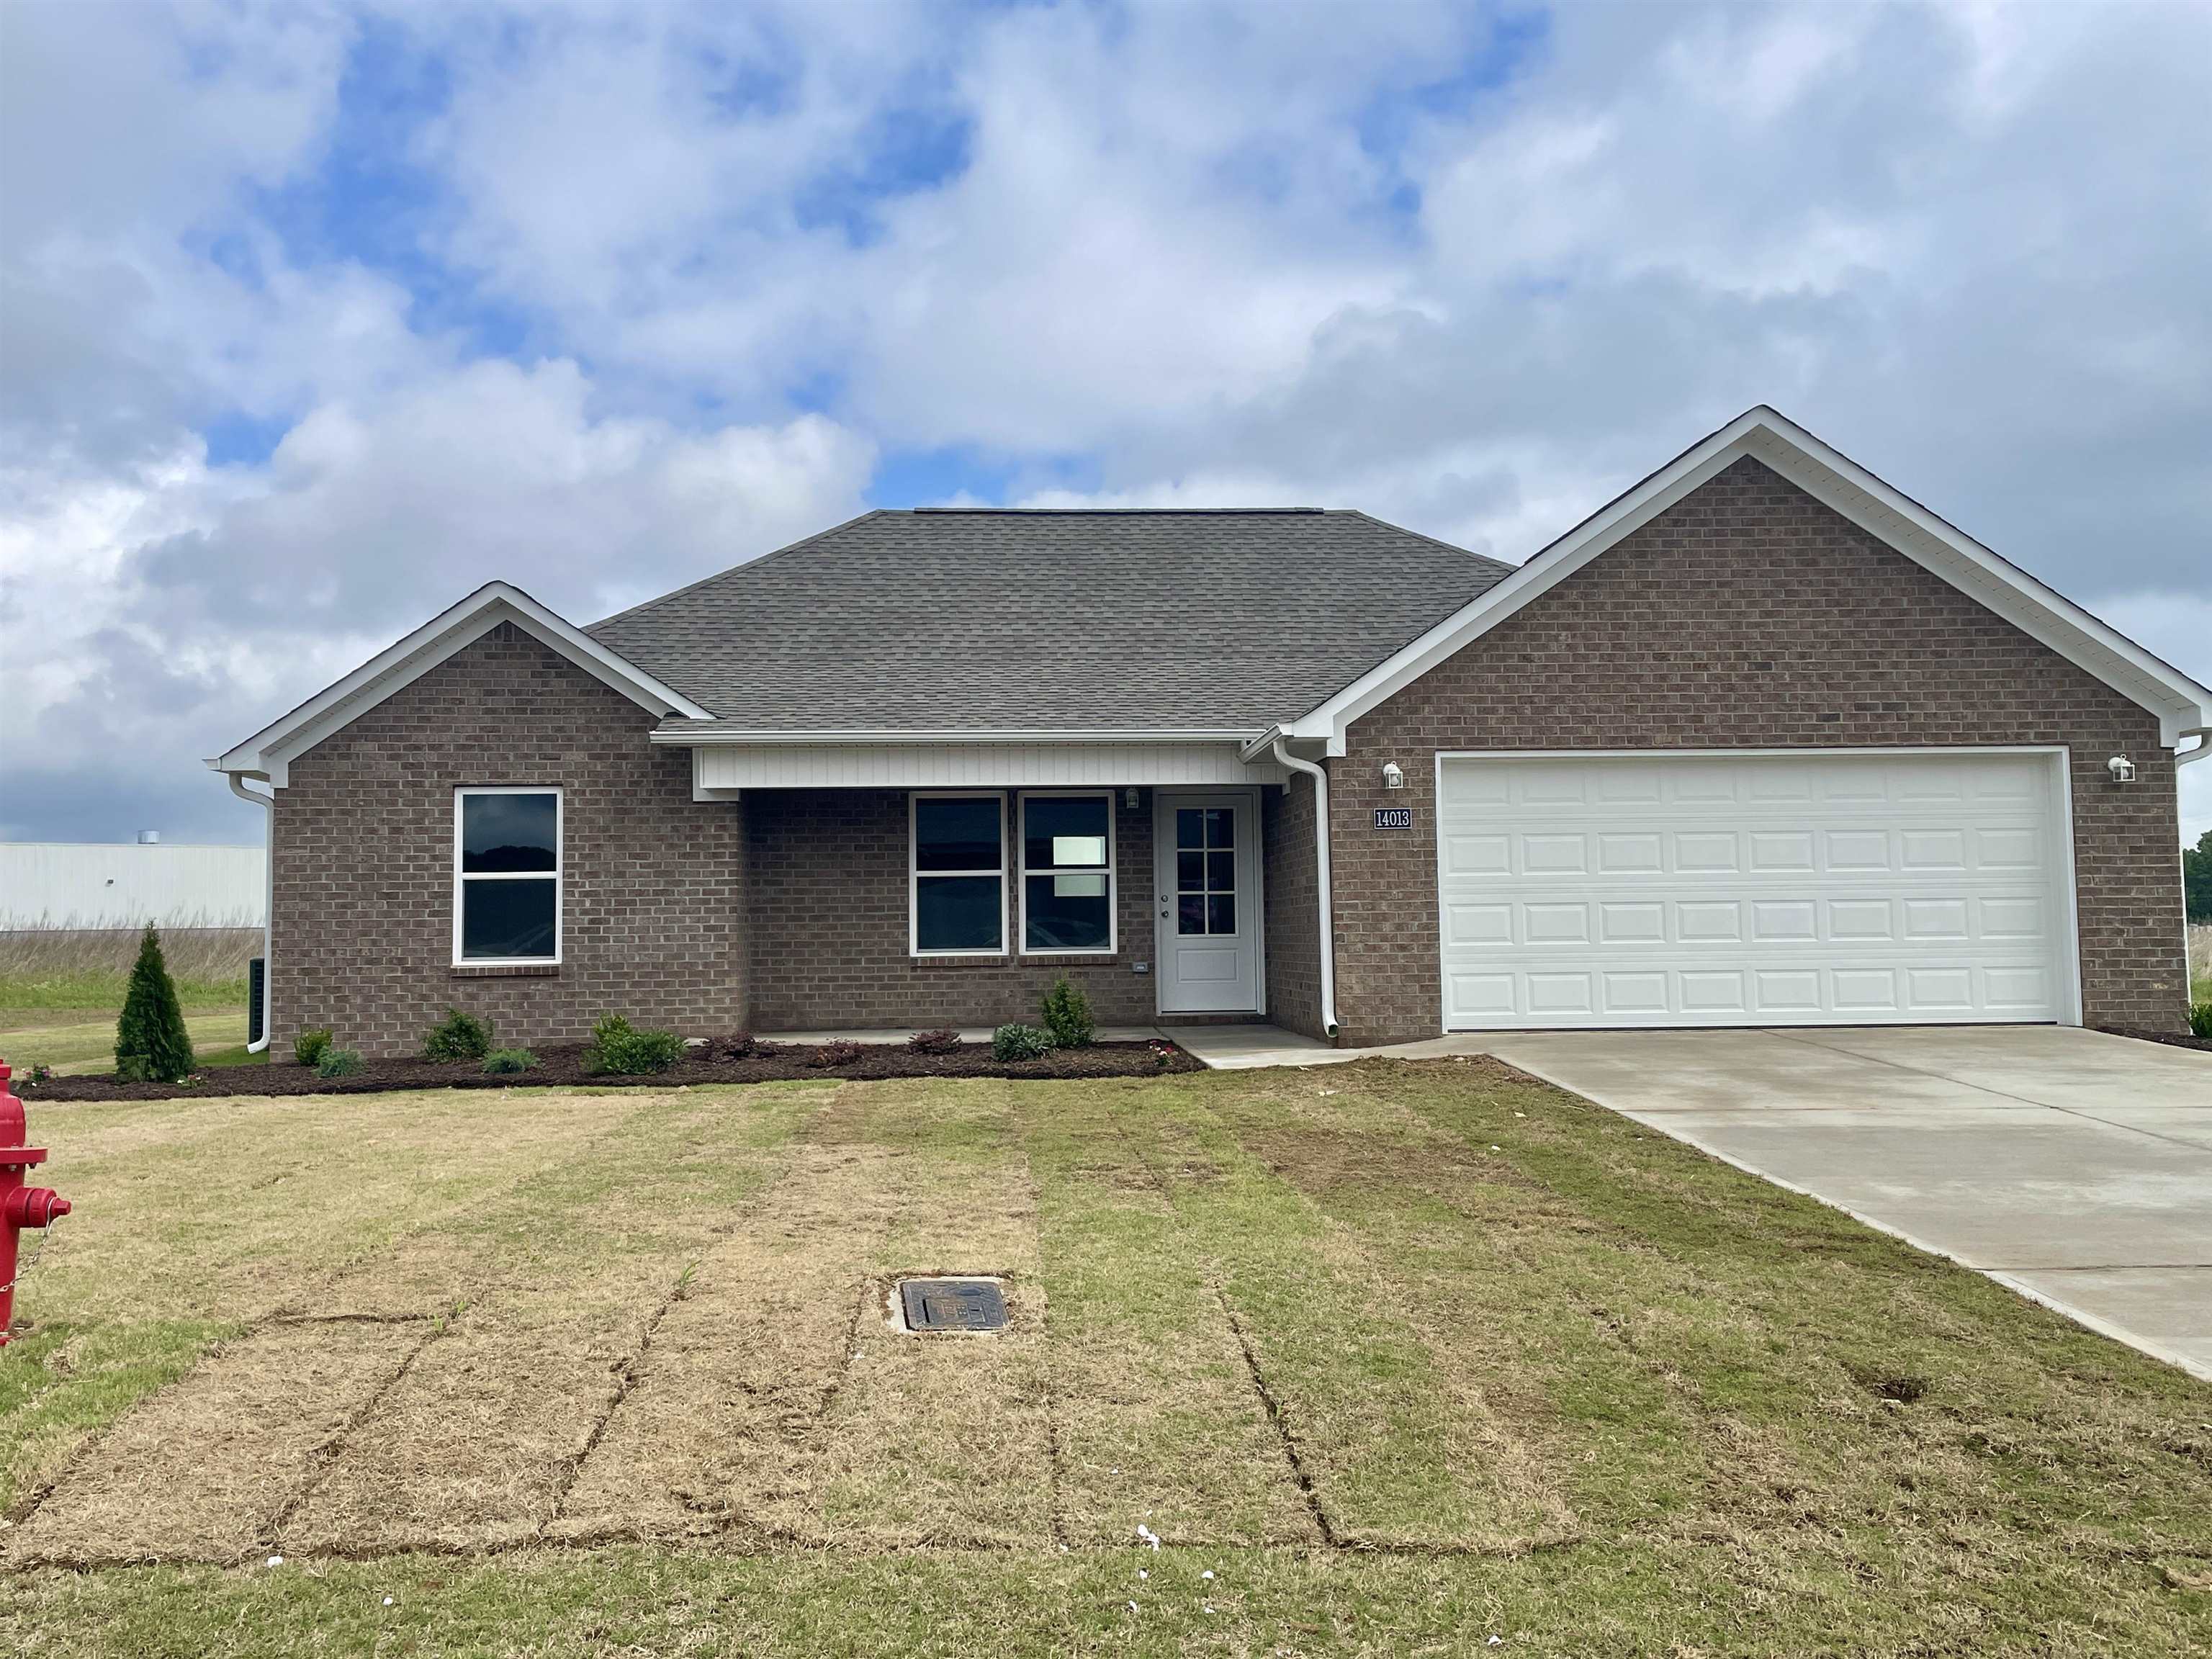 14013 Westhaven Cove, Milan, TN 38358